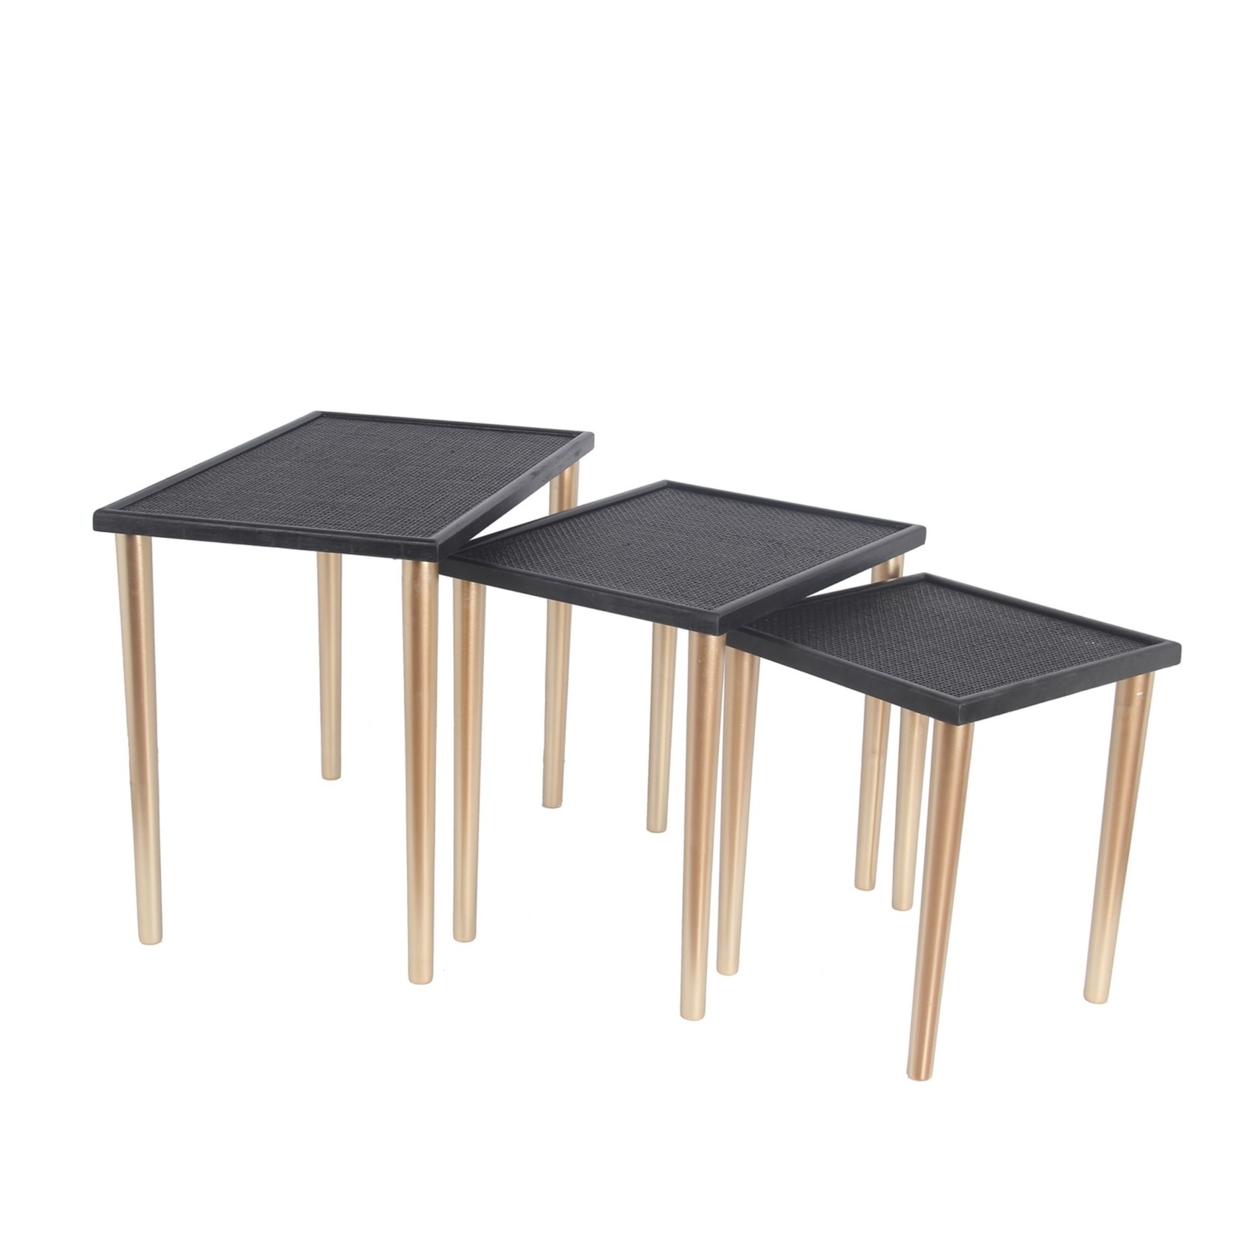 3 Piece Accent Table With Rounded Legs, Black- Saltoro Sherpi